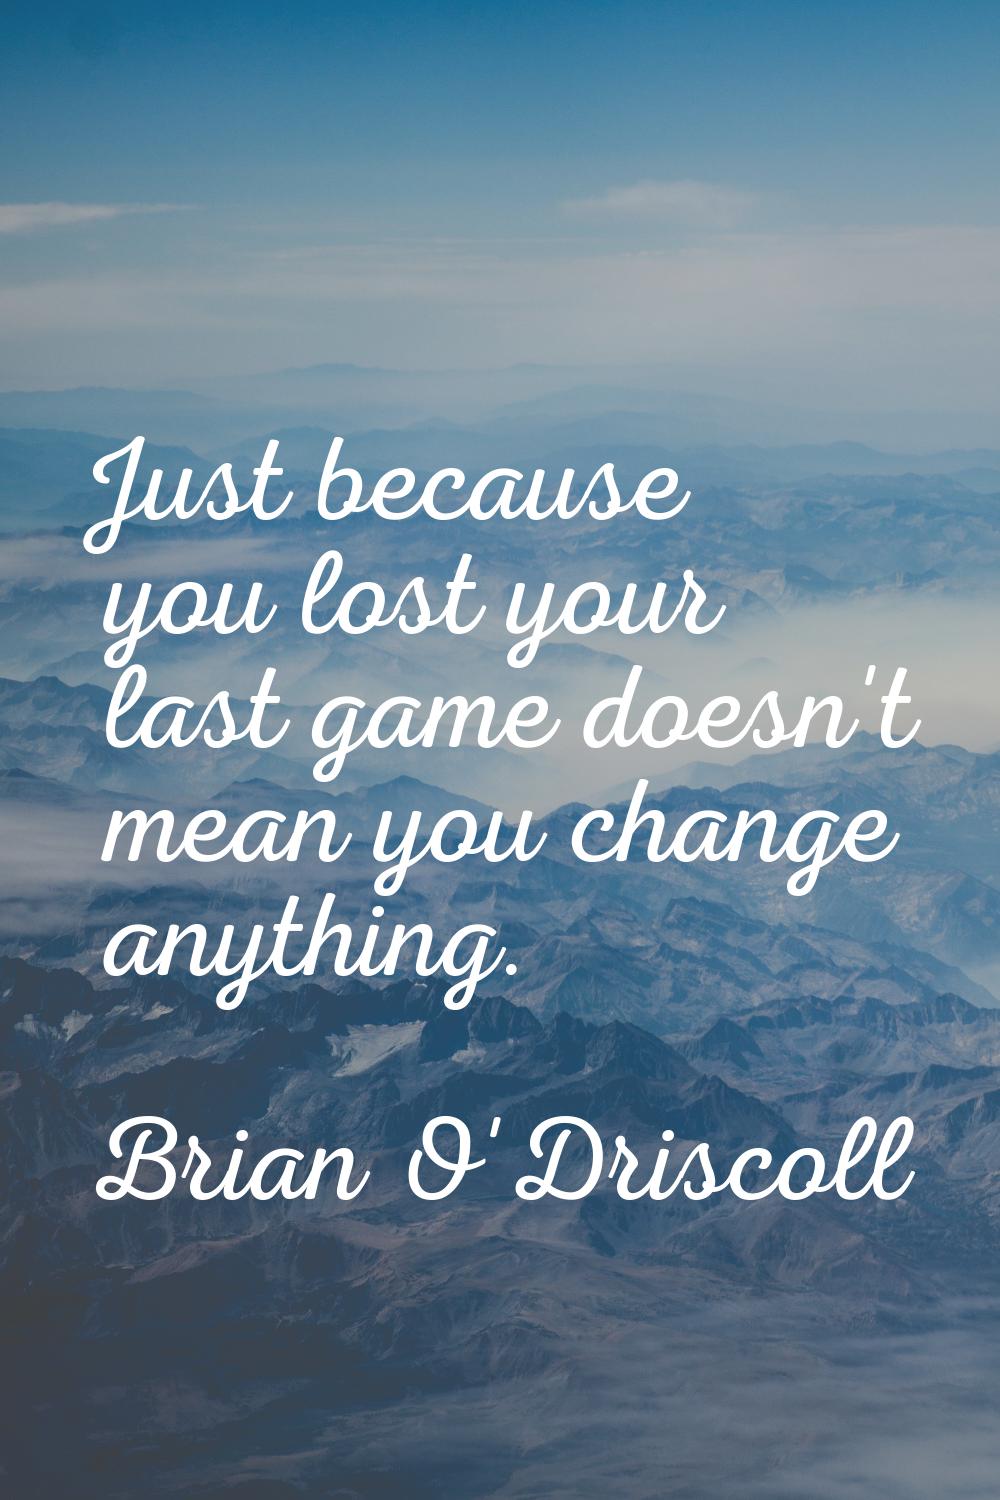 Just because you lost your last game doesn't mean you change anything.